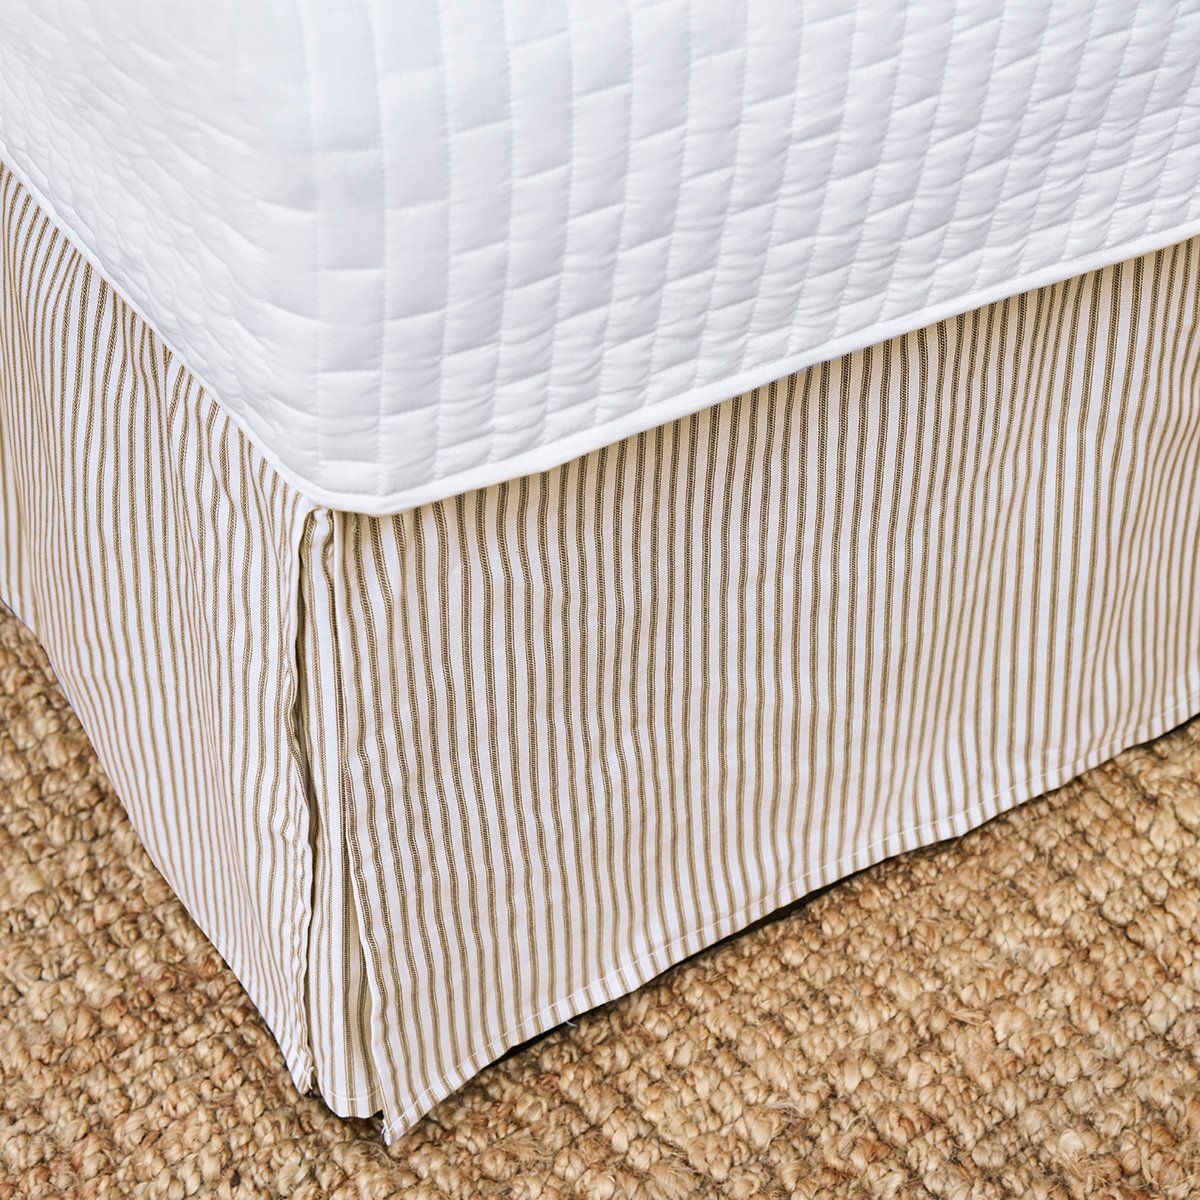 Brown Ticking Stripe Bedskirt | Twin, Full, Queen, King, Cal King, Extra Long Twin